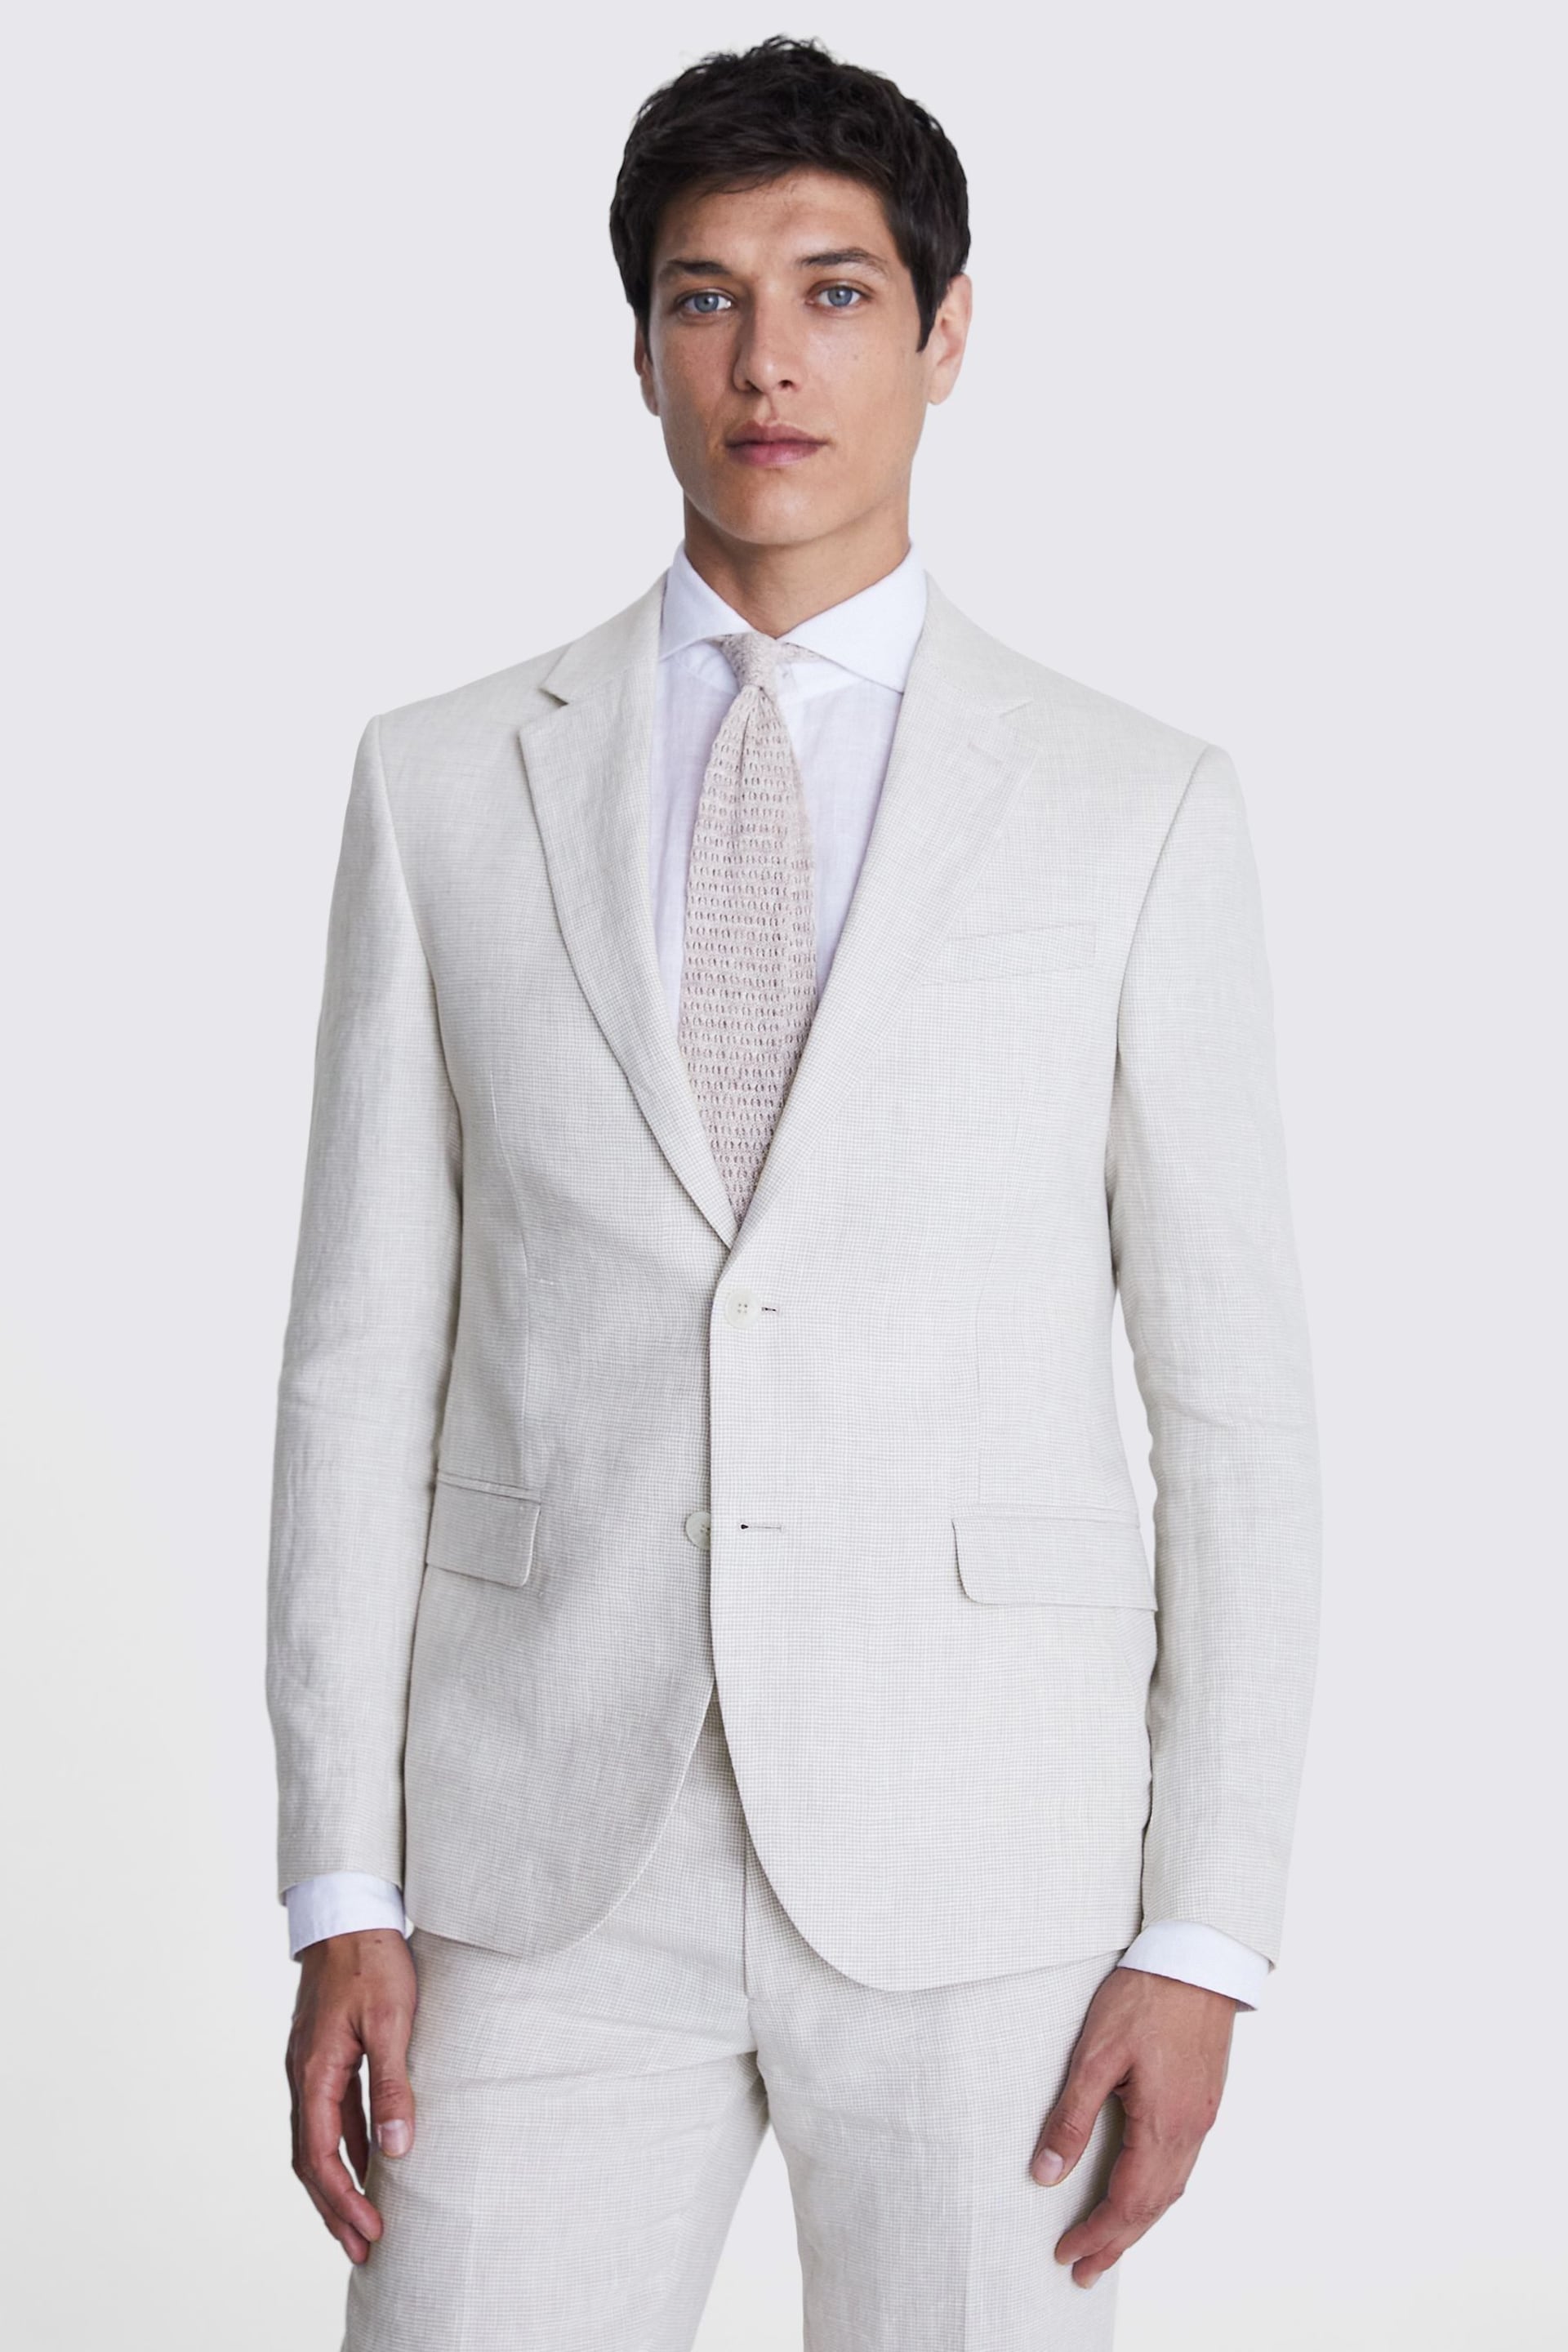 MOSS Natural Slim Fit Puppytooth Linen Suit Jacket - Image 4 of 5